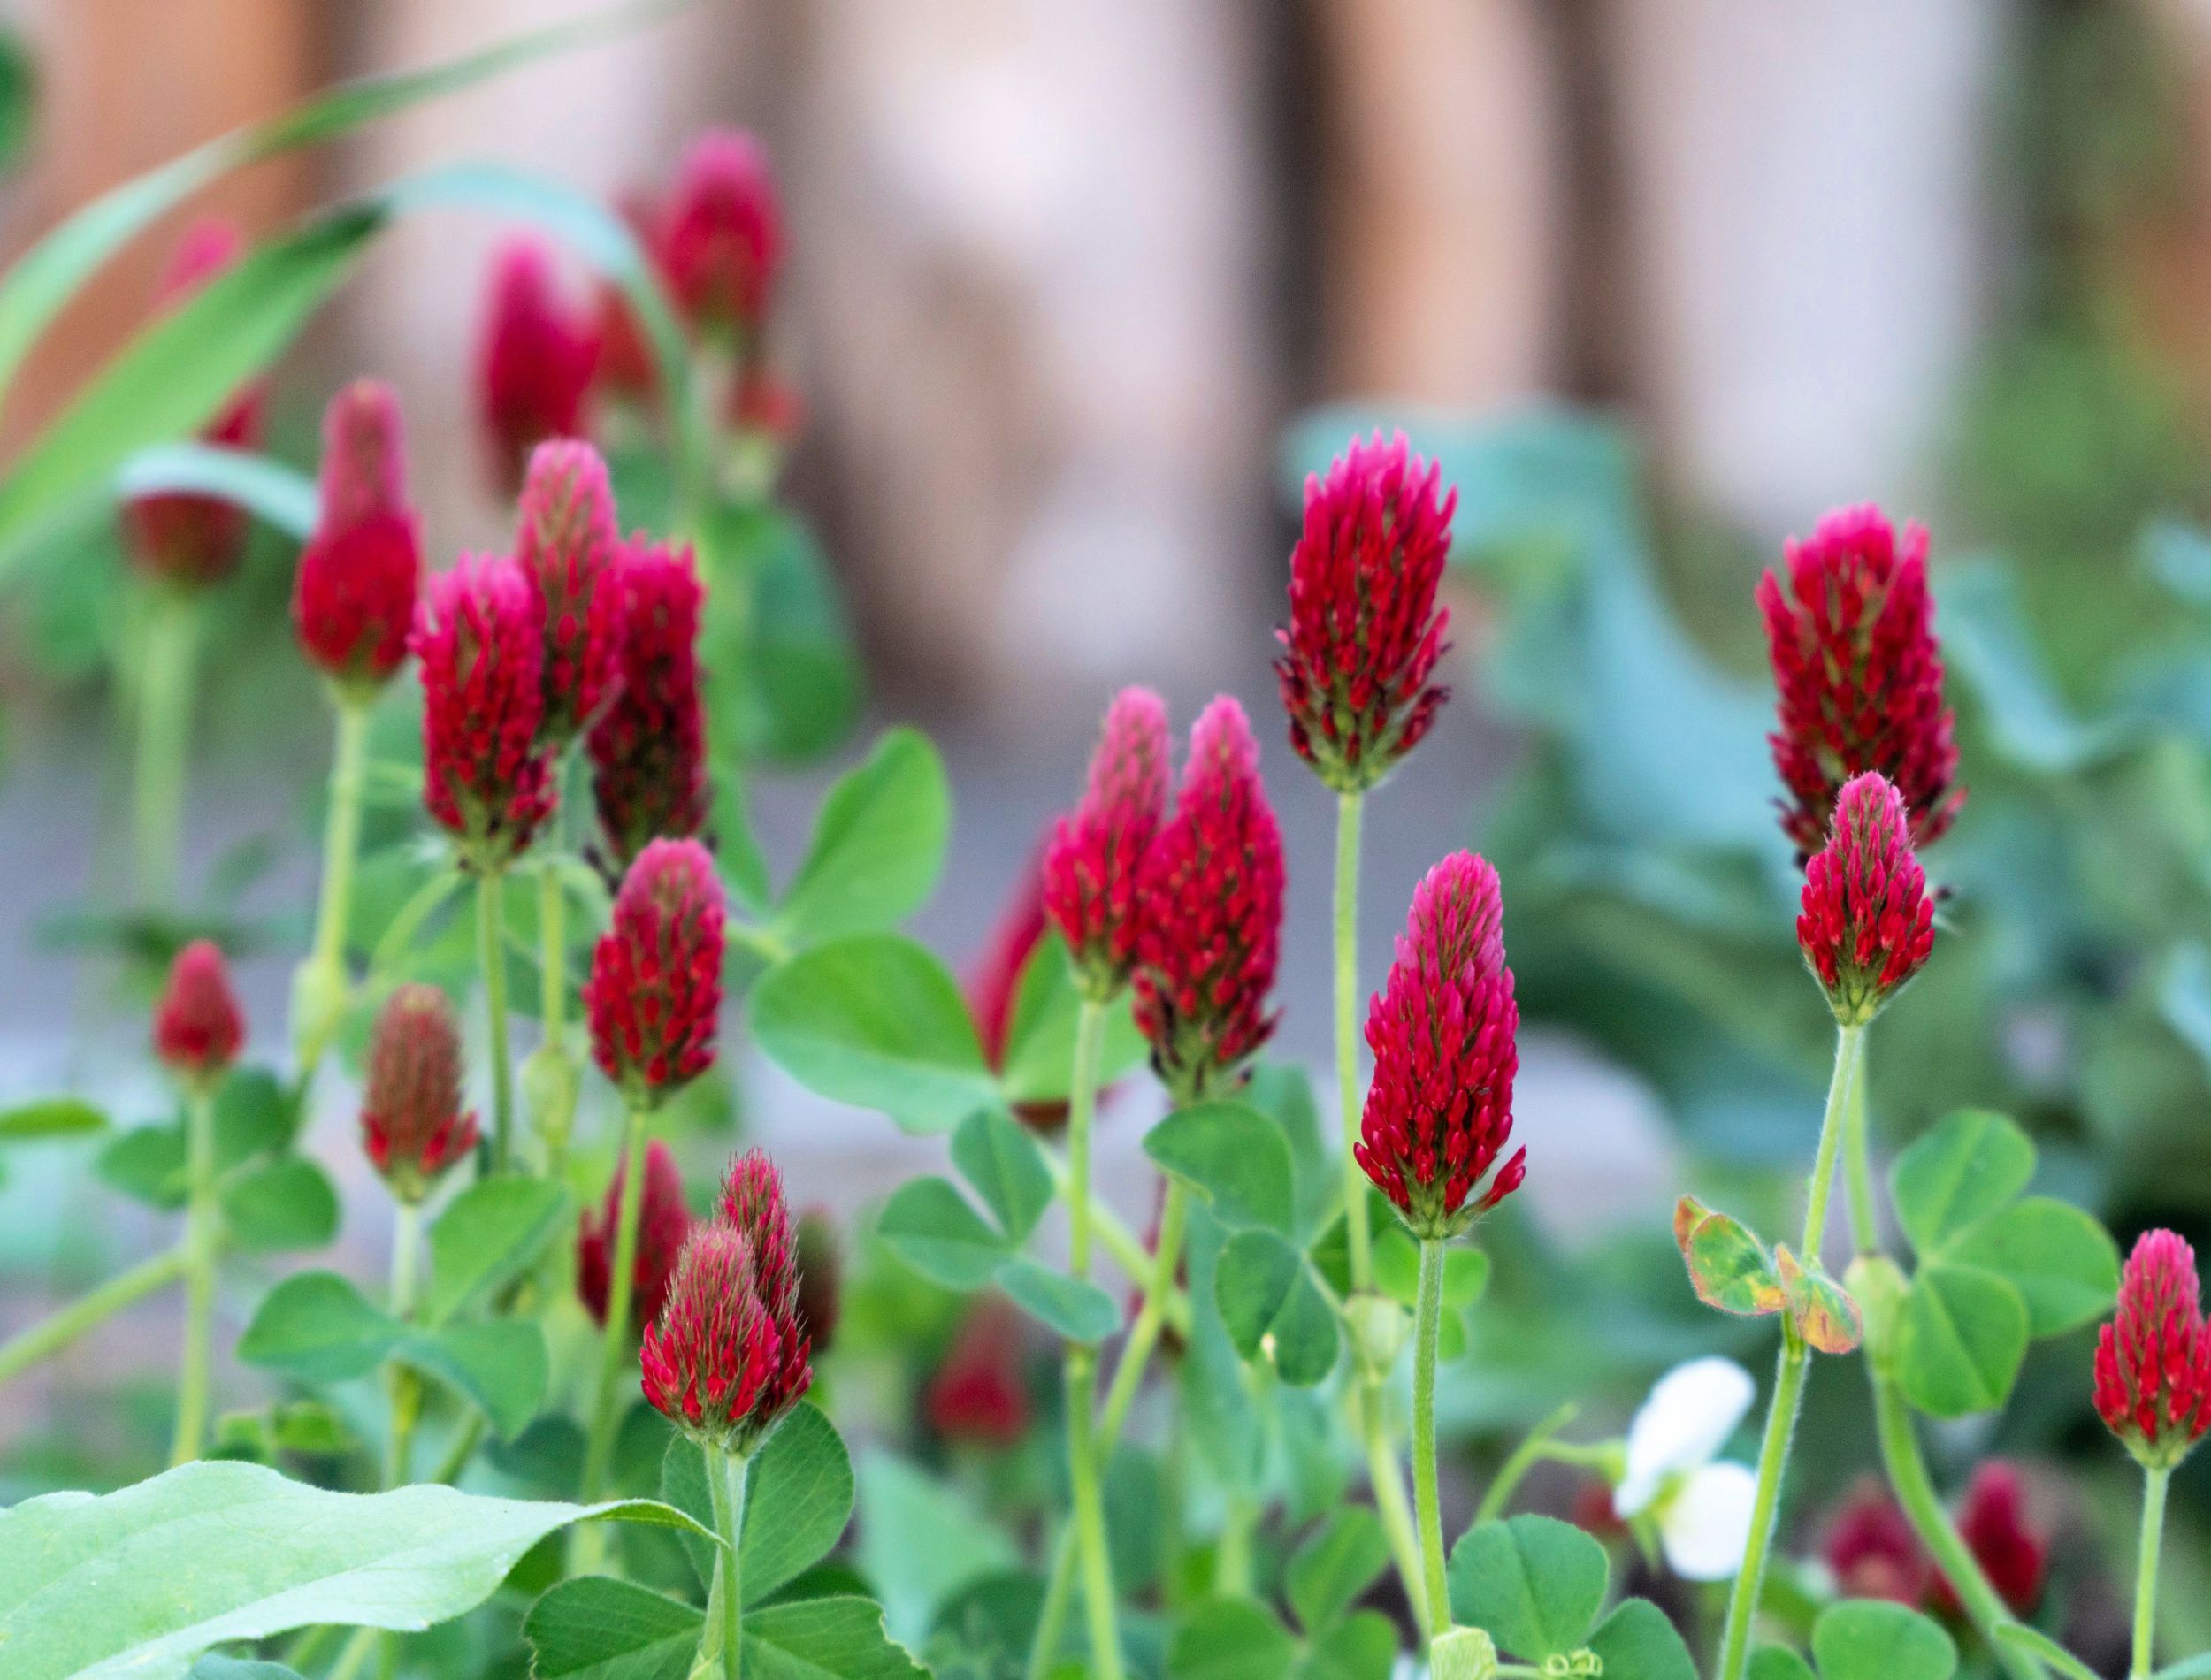 Crimson Clover with Blurry Background